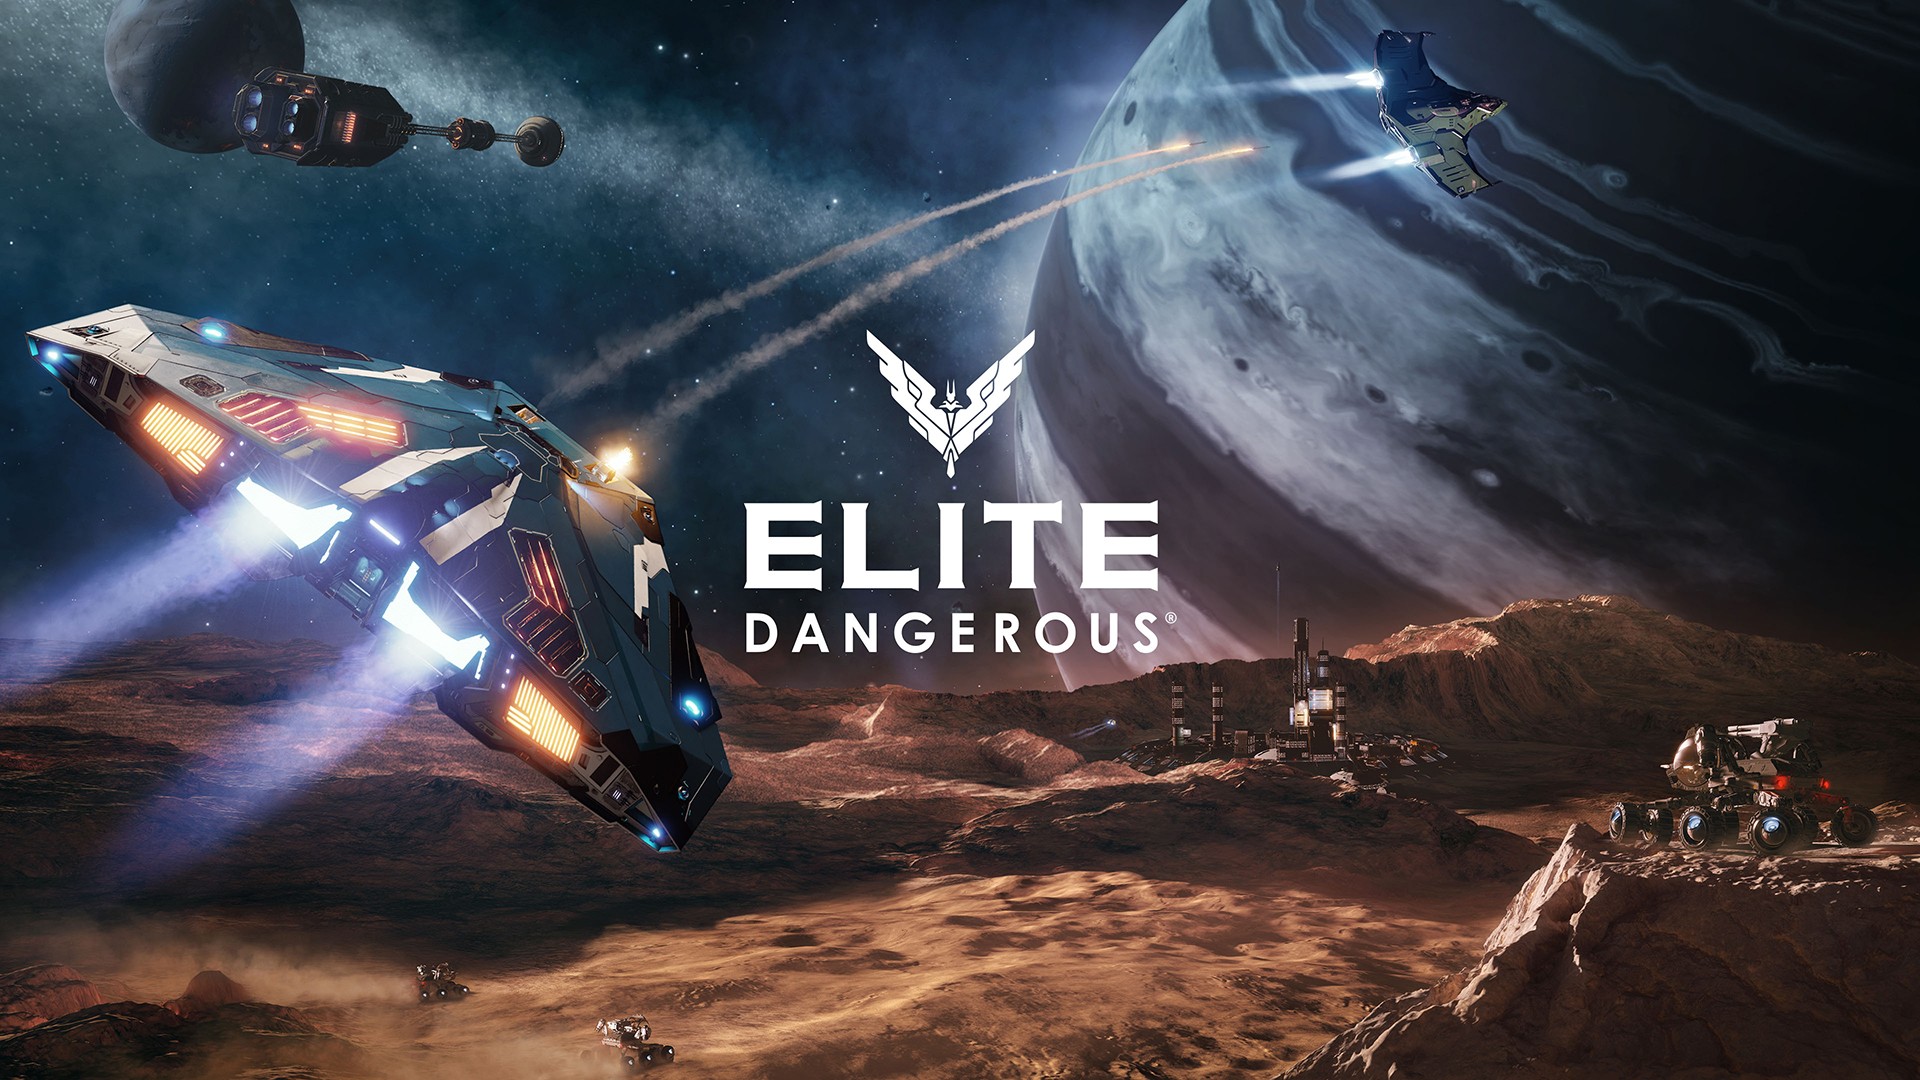 Elite: Dangerous Is Now Available For Xbox One - Xbox Wire